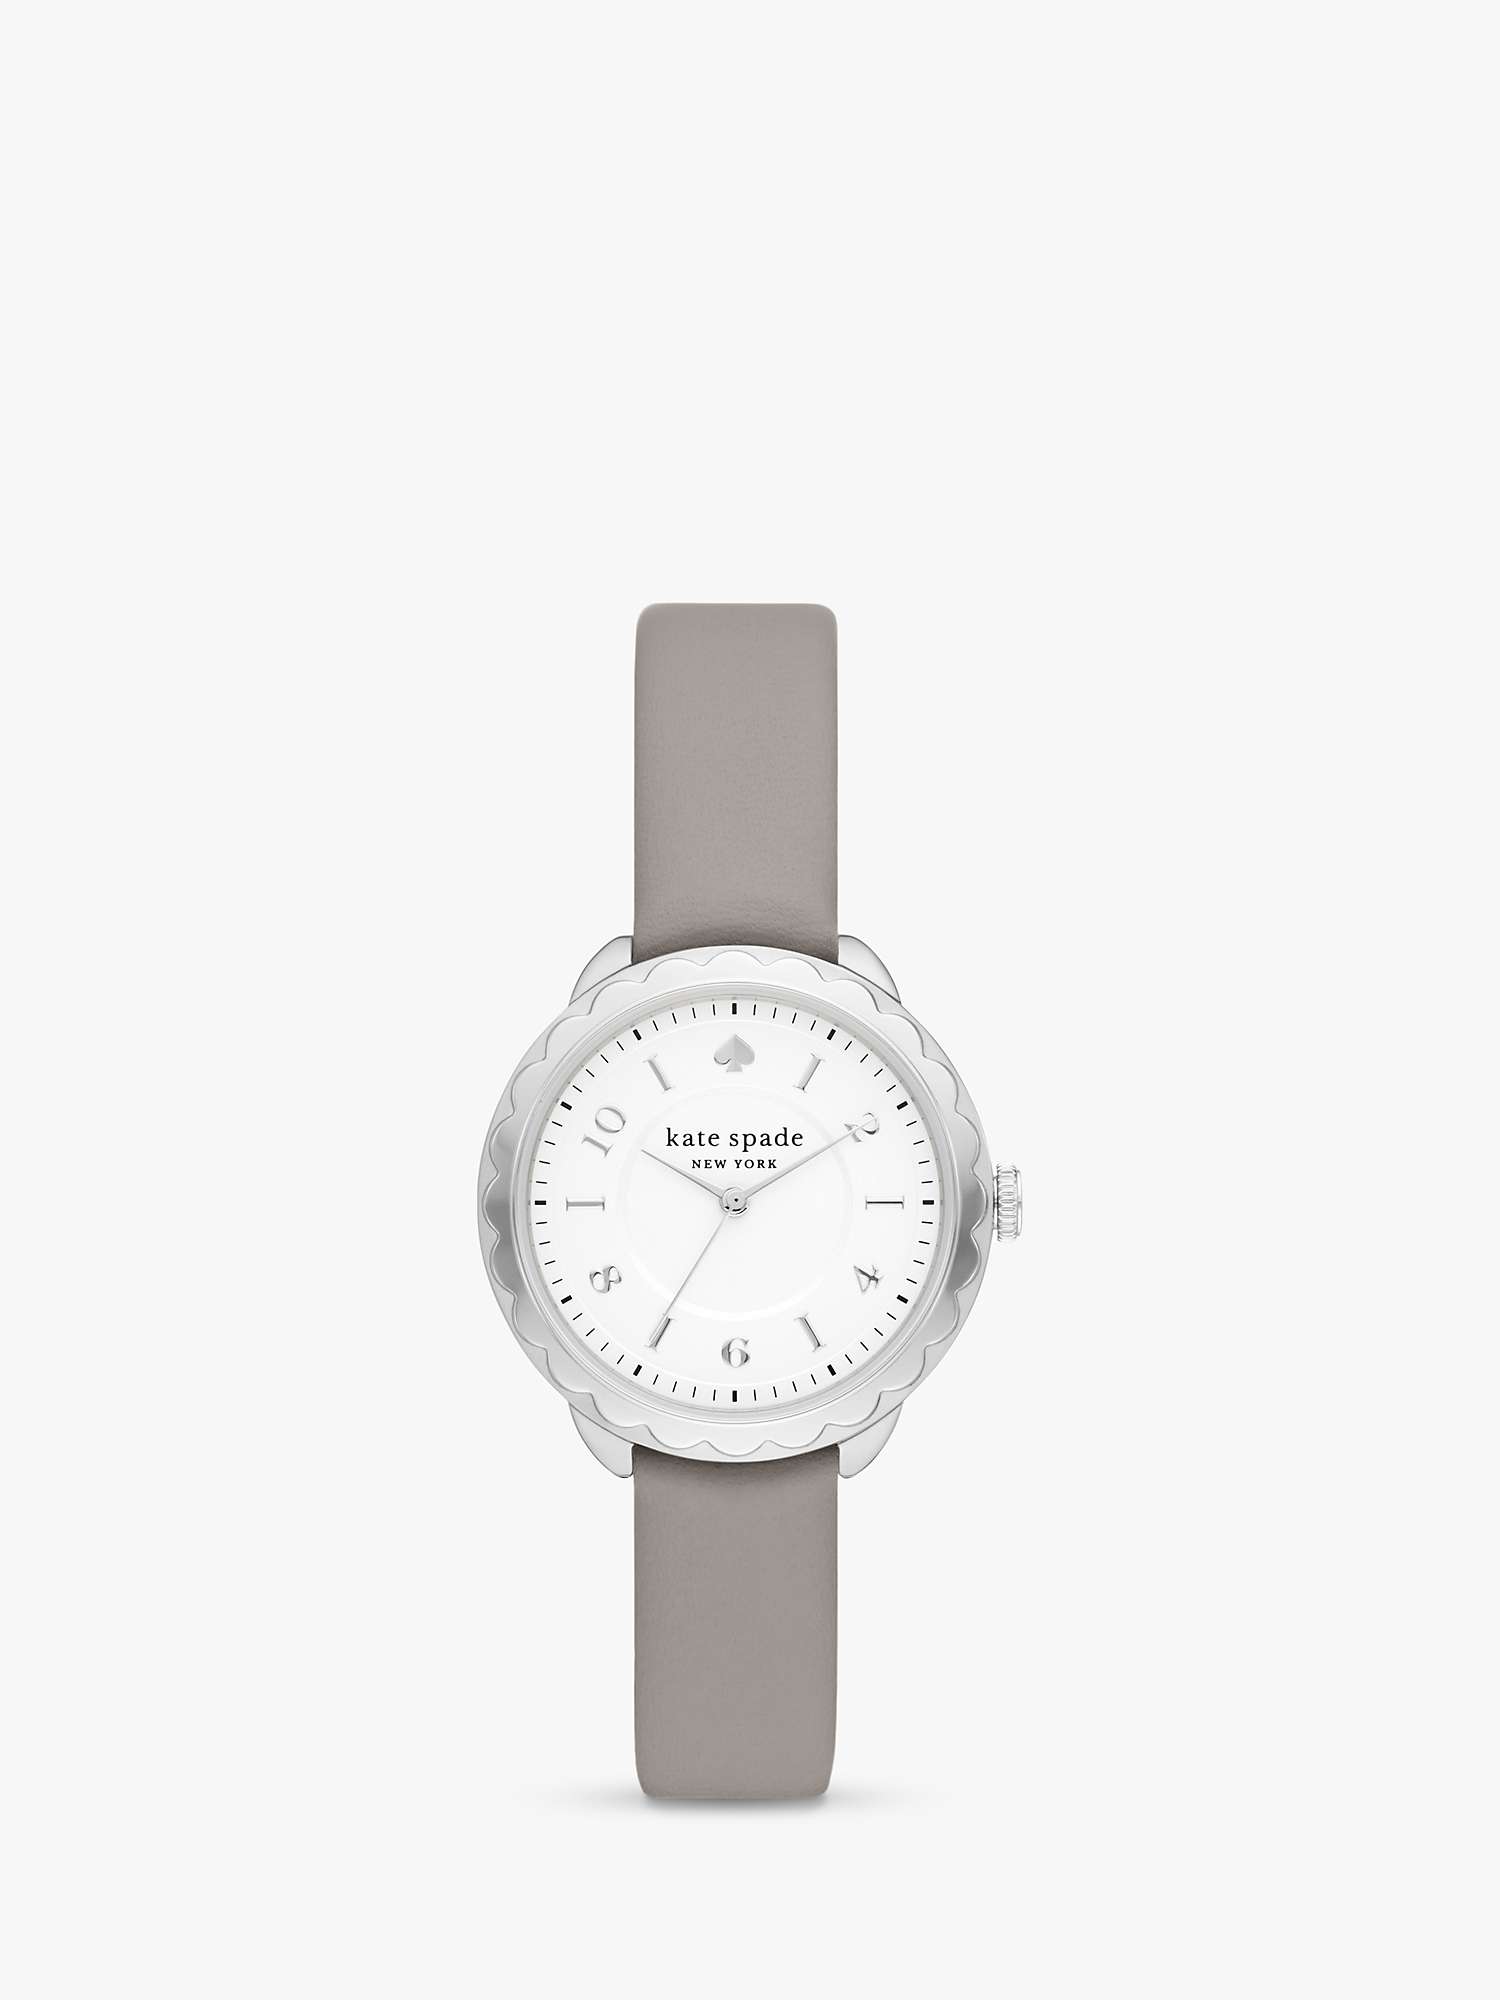 kate spade new york Morningside Leather Strap Watch, Silver KSW1757 at John  Lewis & Partners